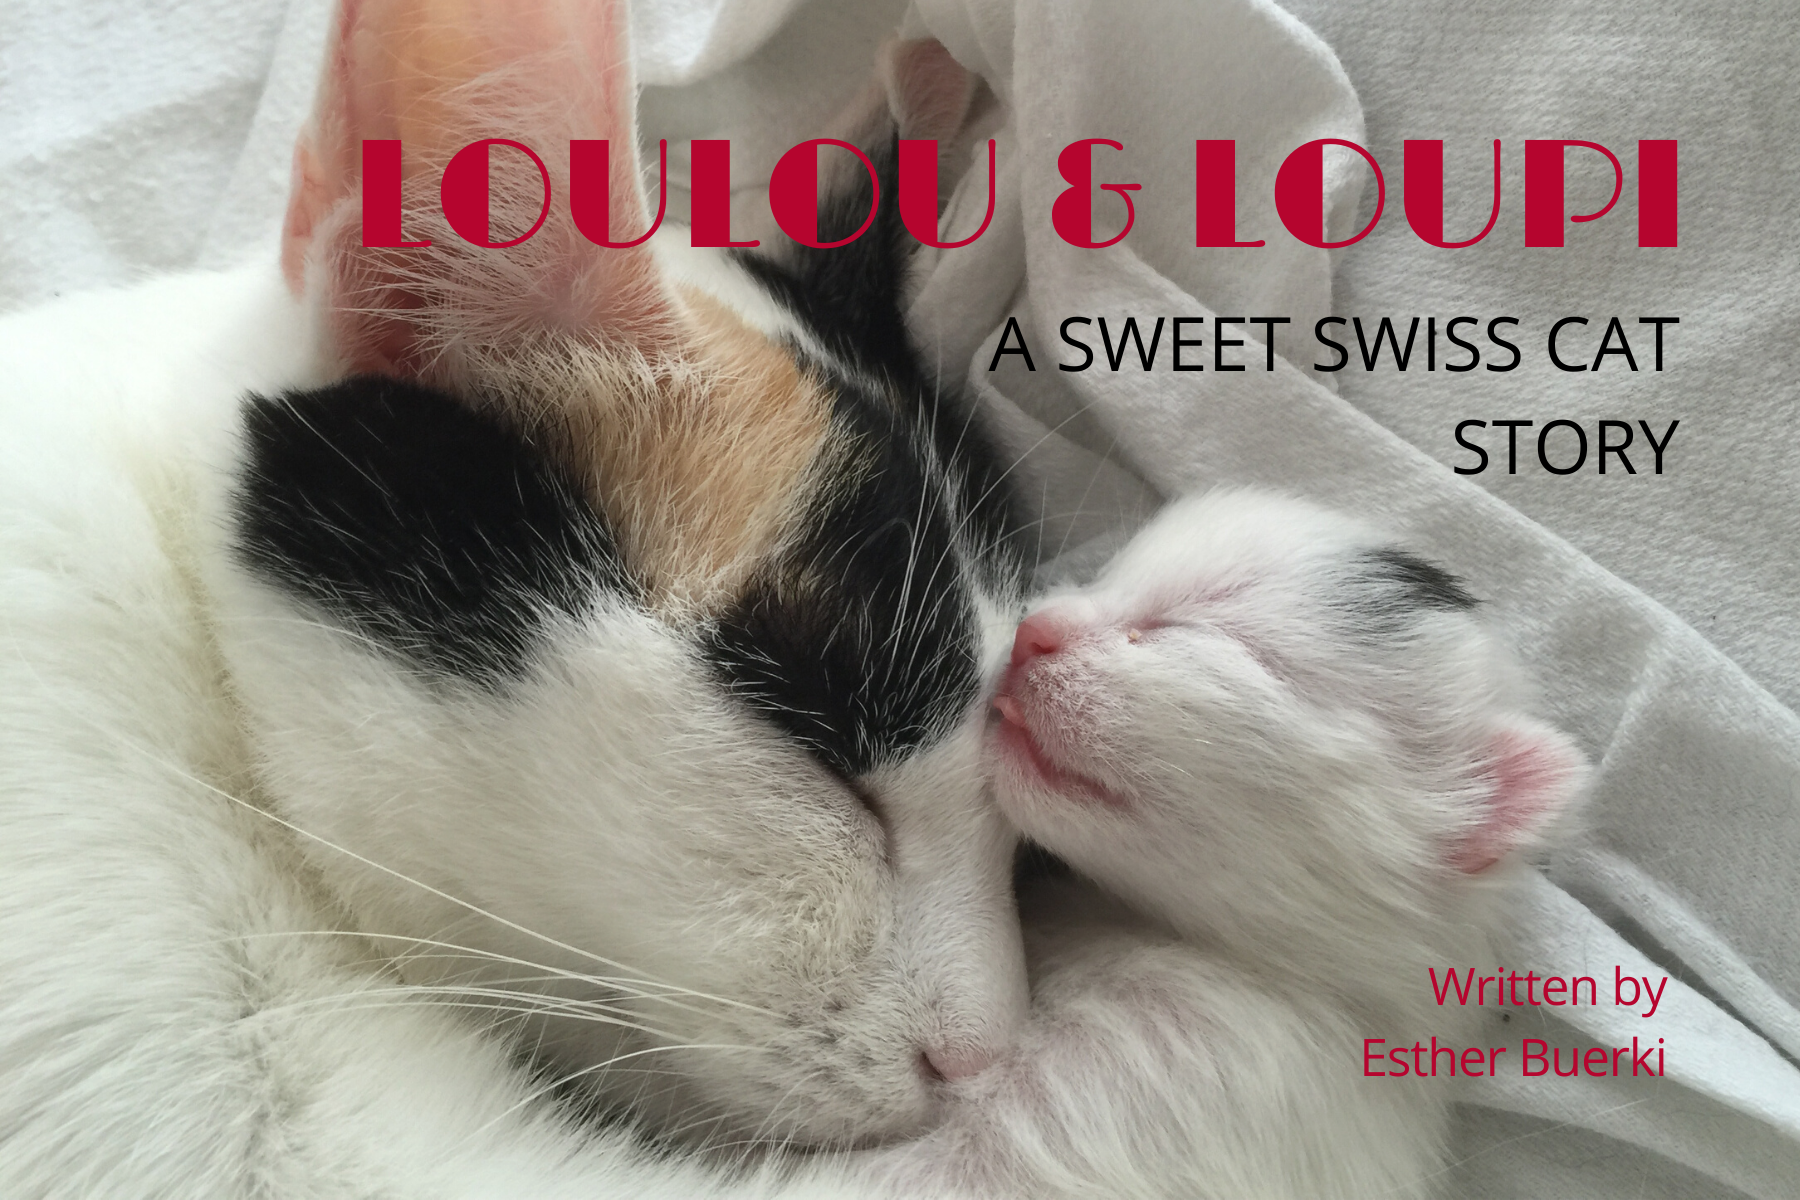 Loulou & Loupi, written by Esther Buerki, published by SWISS MADE STORY